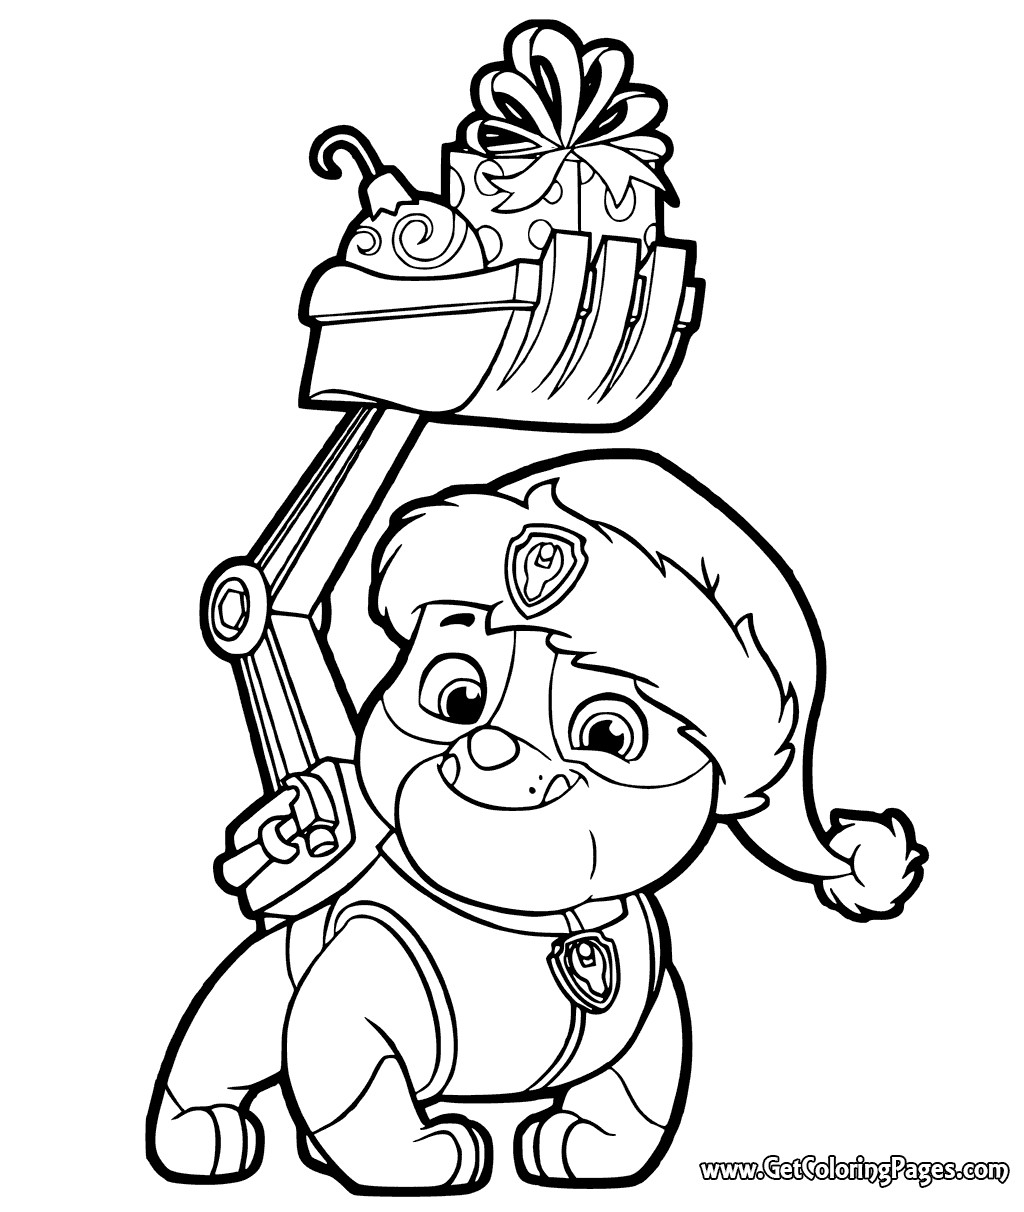 nickelodeon christmas coloring pages at getcolorings